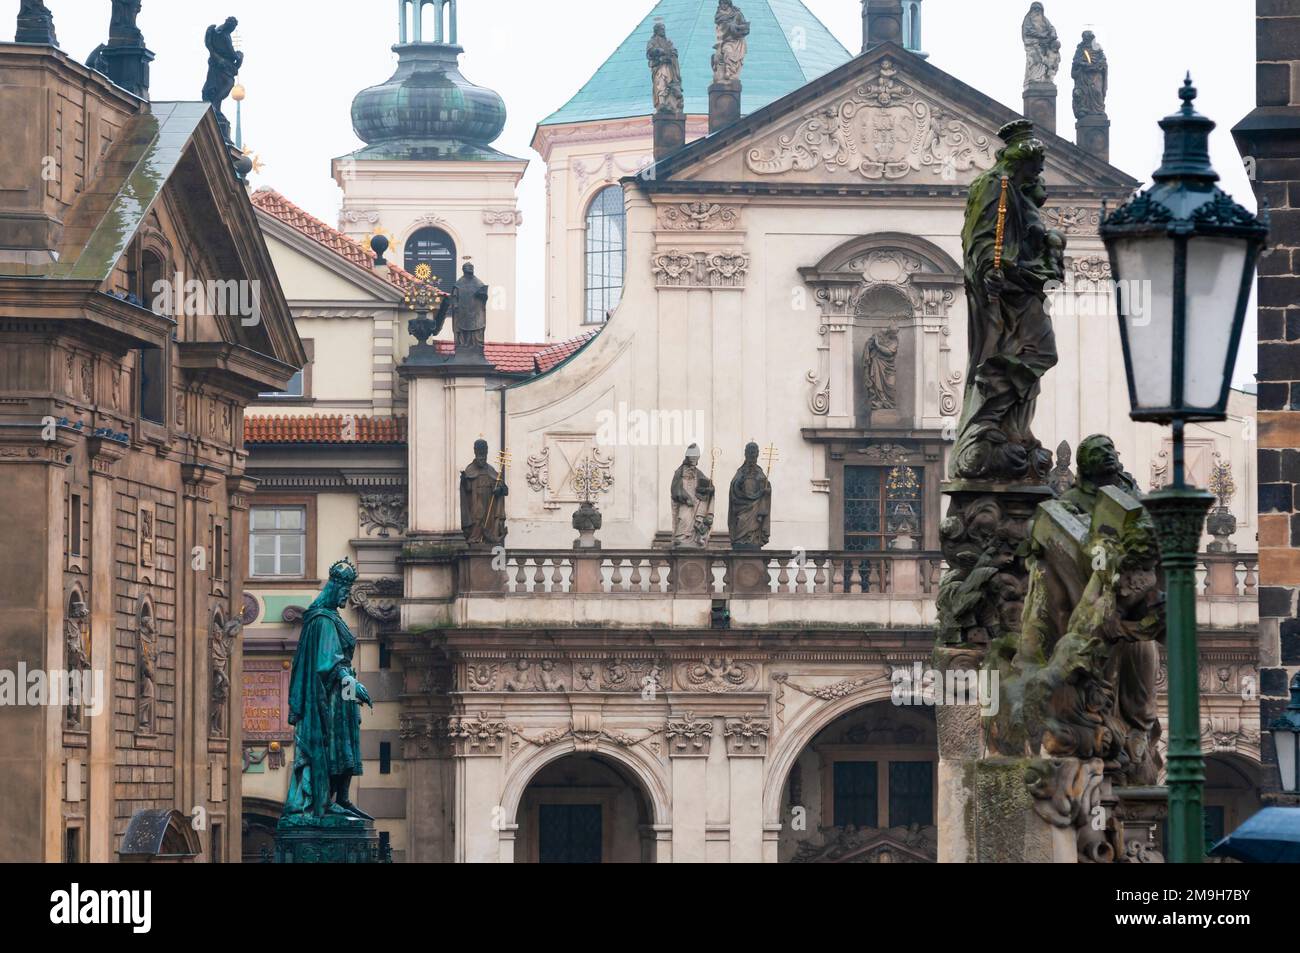 Statues and facade of Saint Salvator Church in old town, Prague, Czech Republic Stock Photo